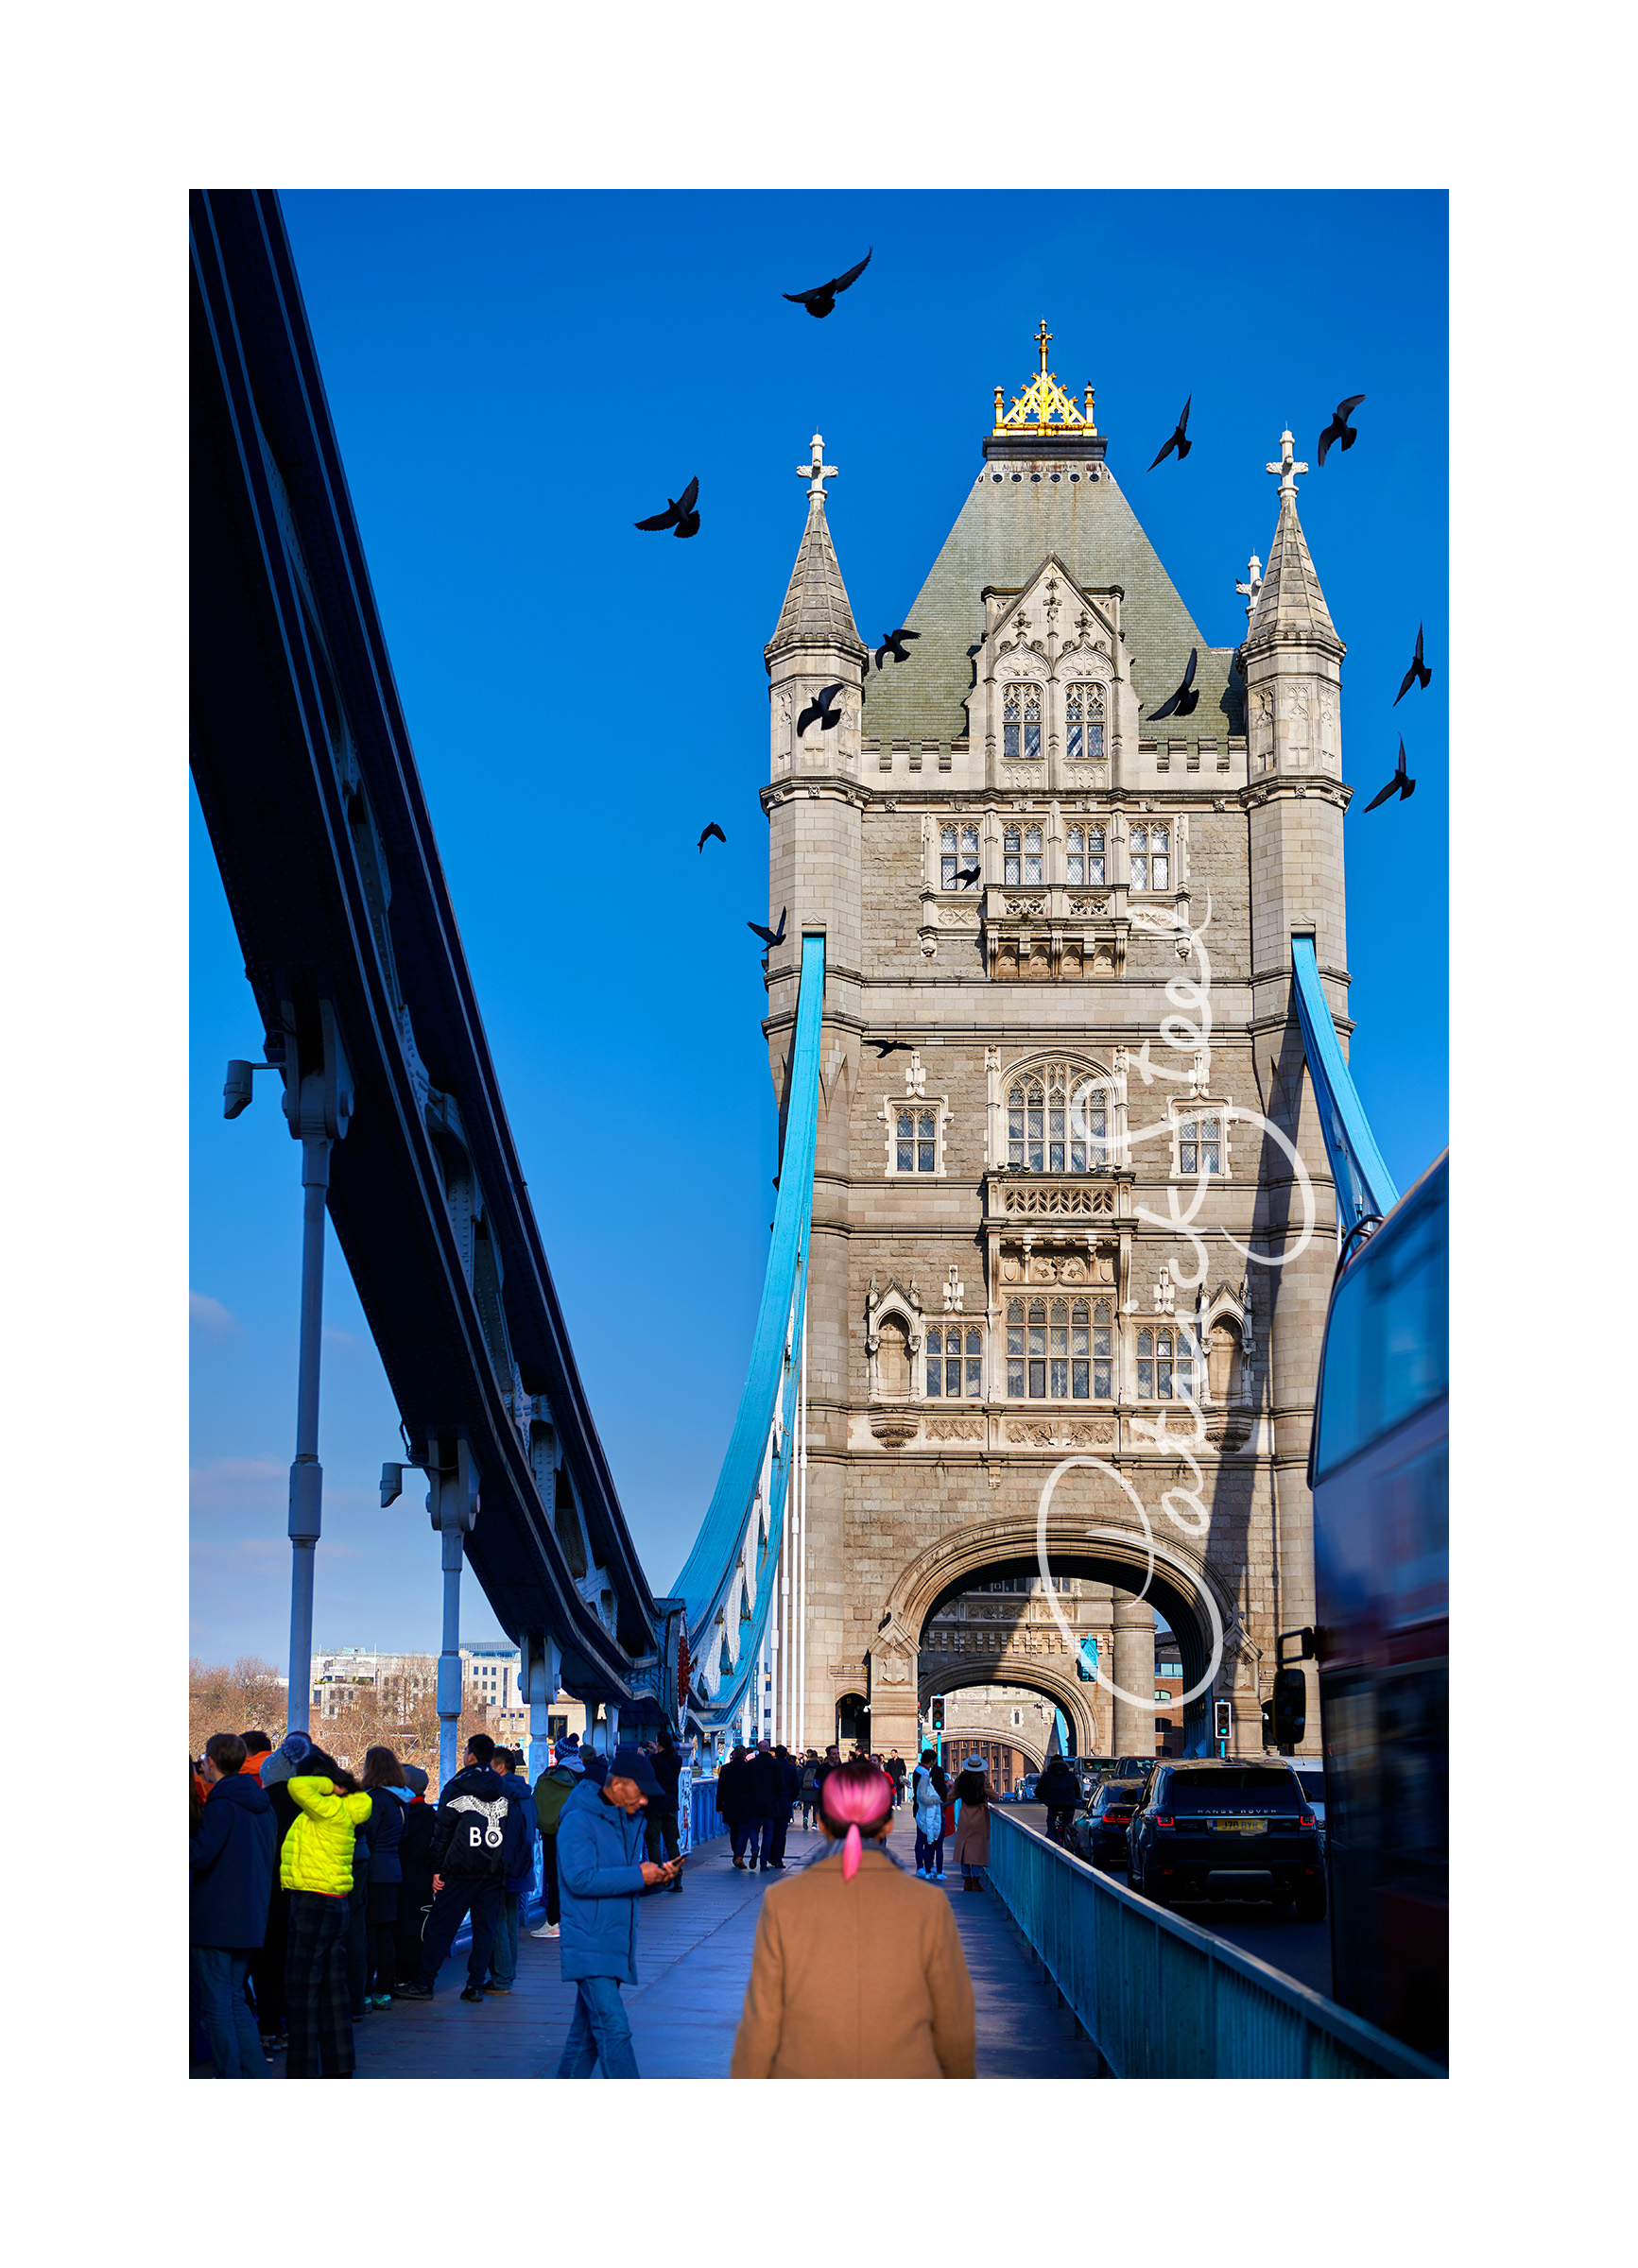 limited edition photograph of tower bridge london by british photographer patrick steel